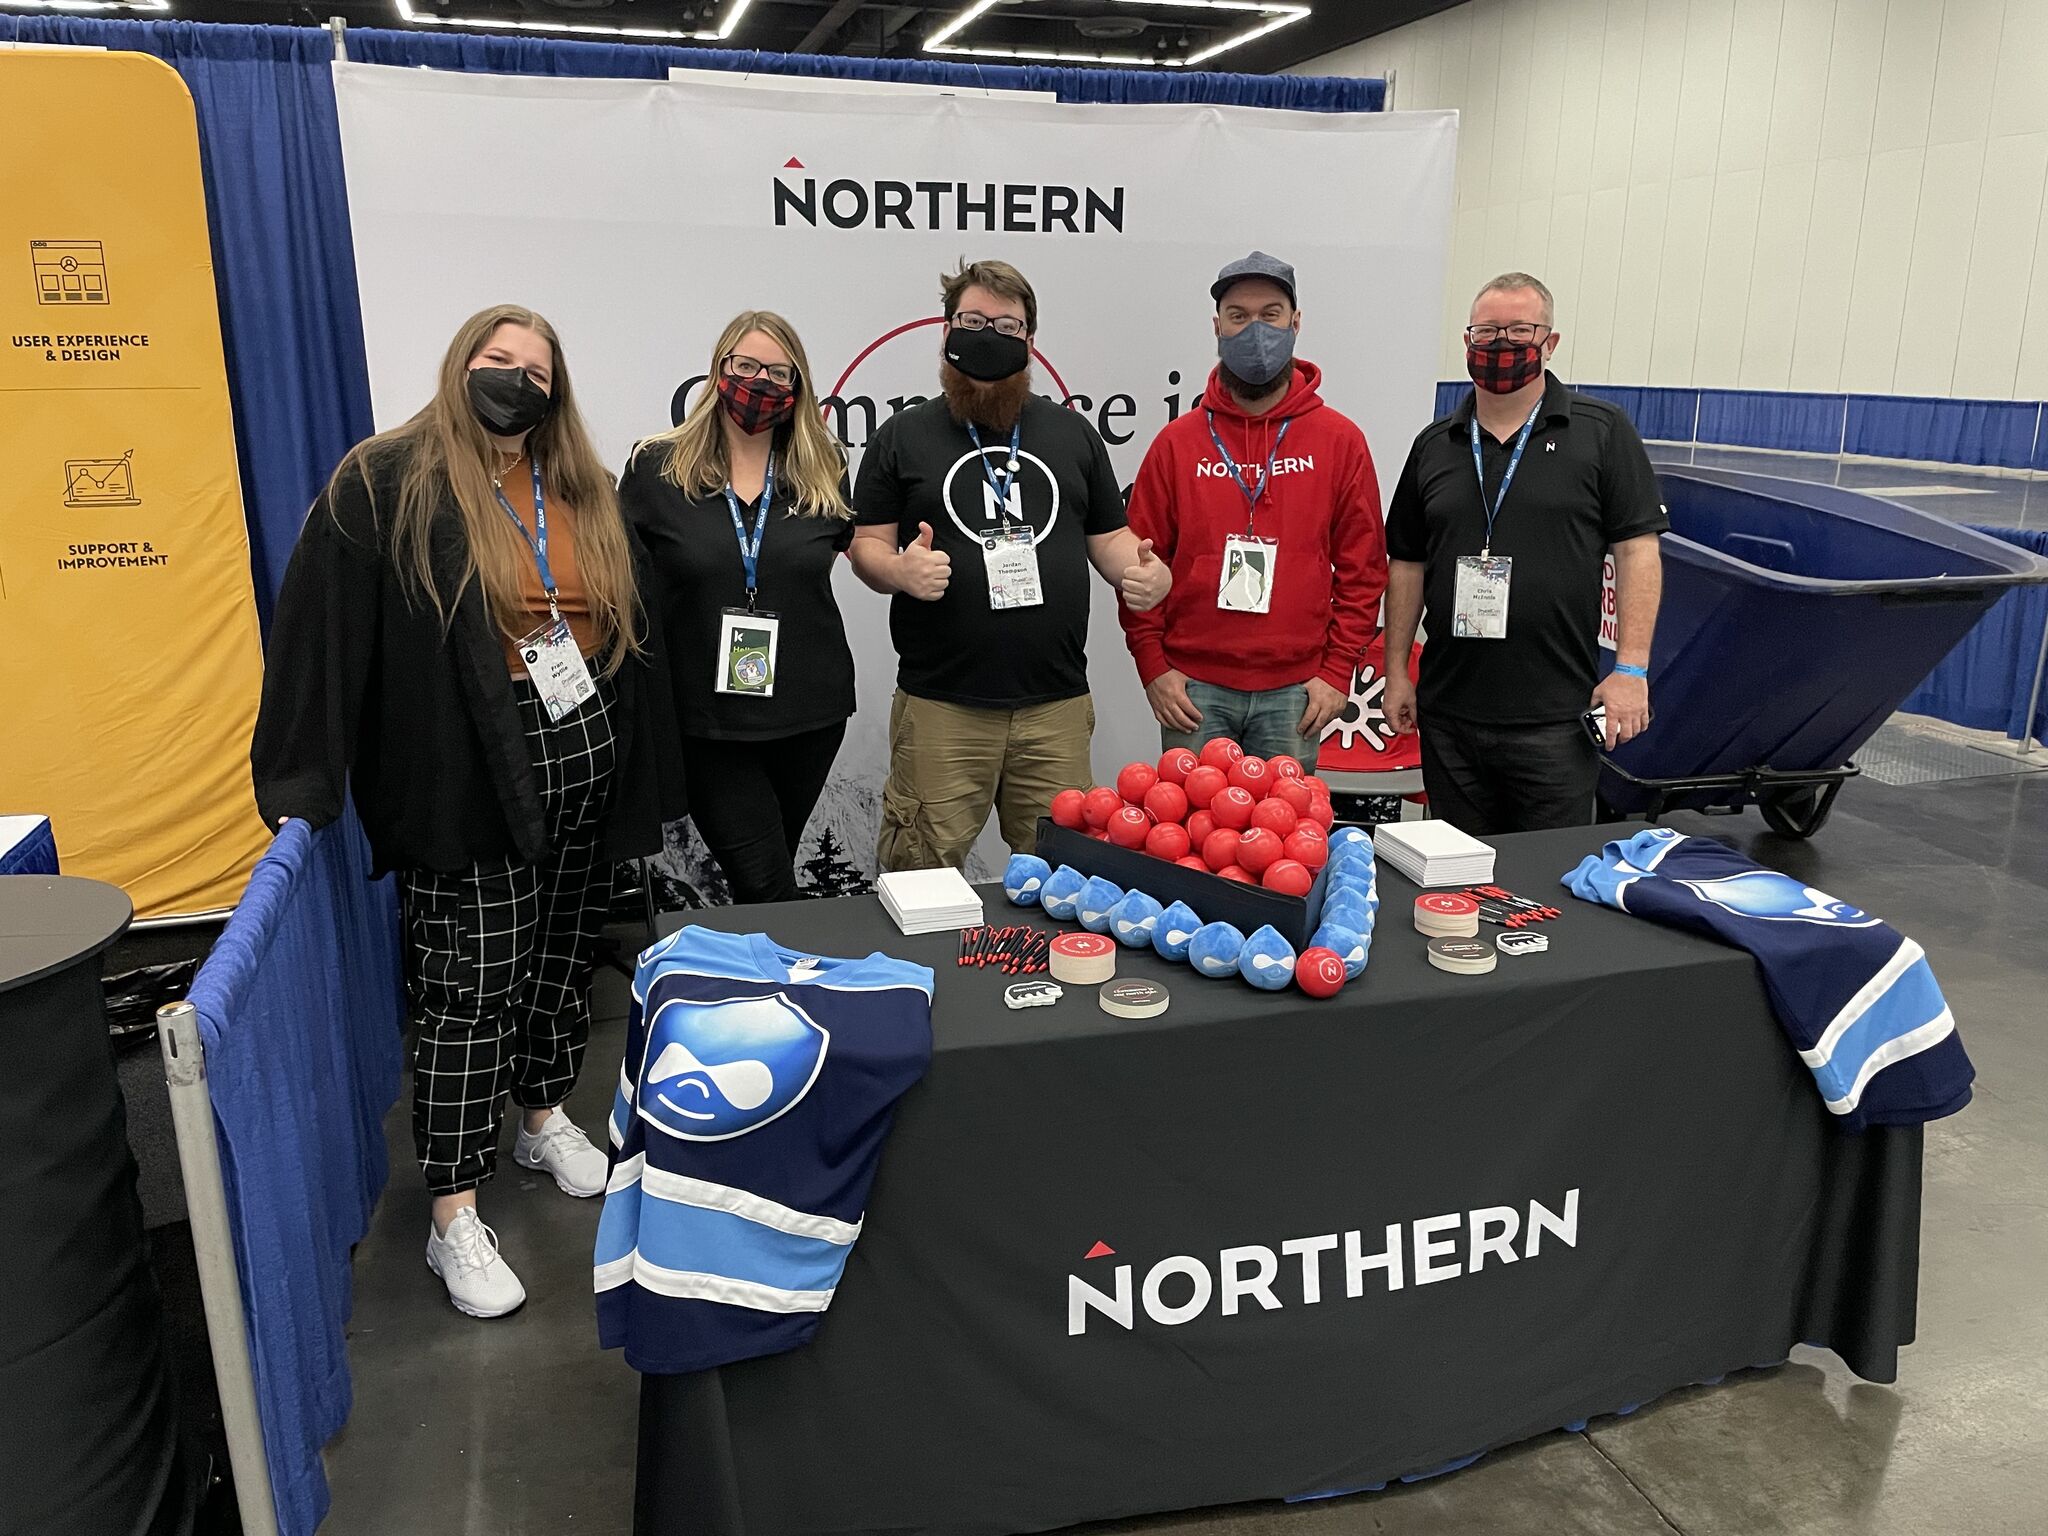 Northern Attended DrupalCon 2022 in Portland, Oregon Northern